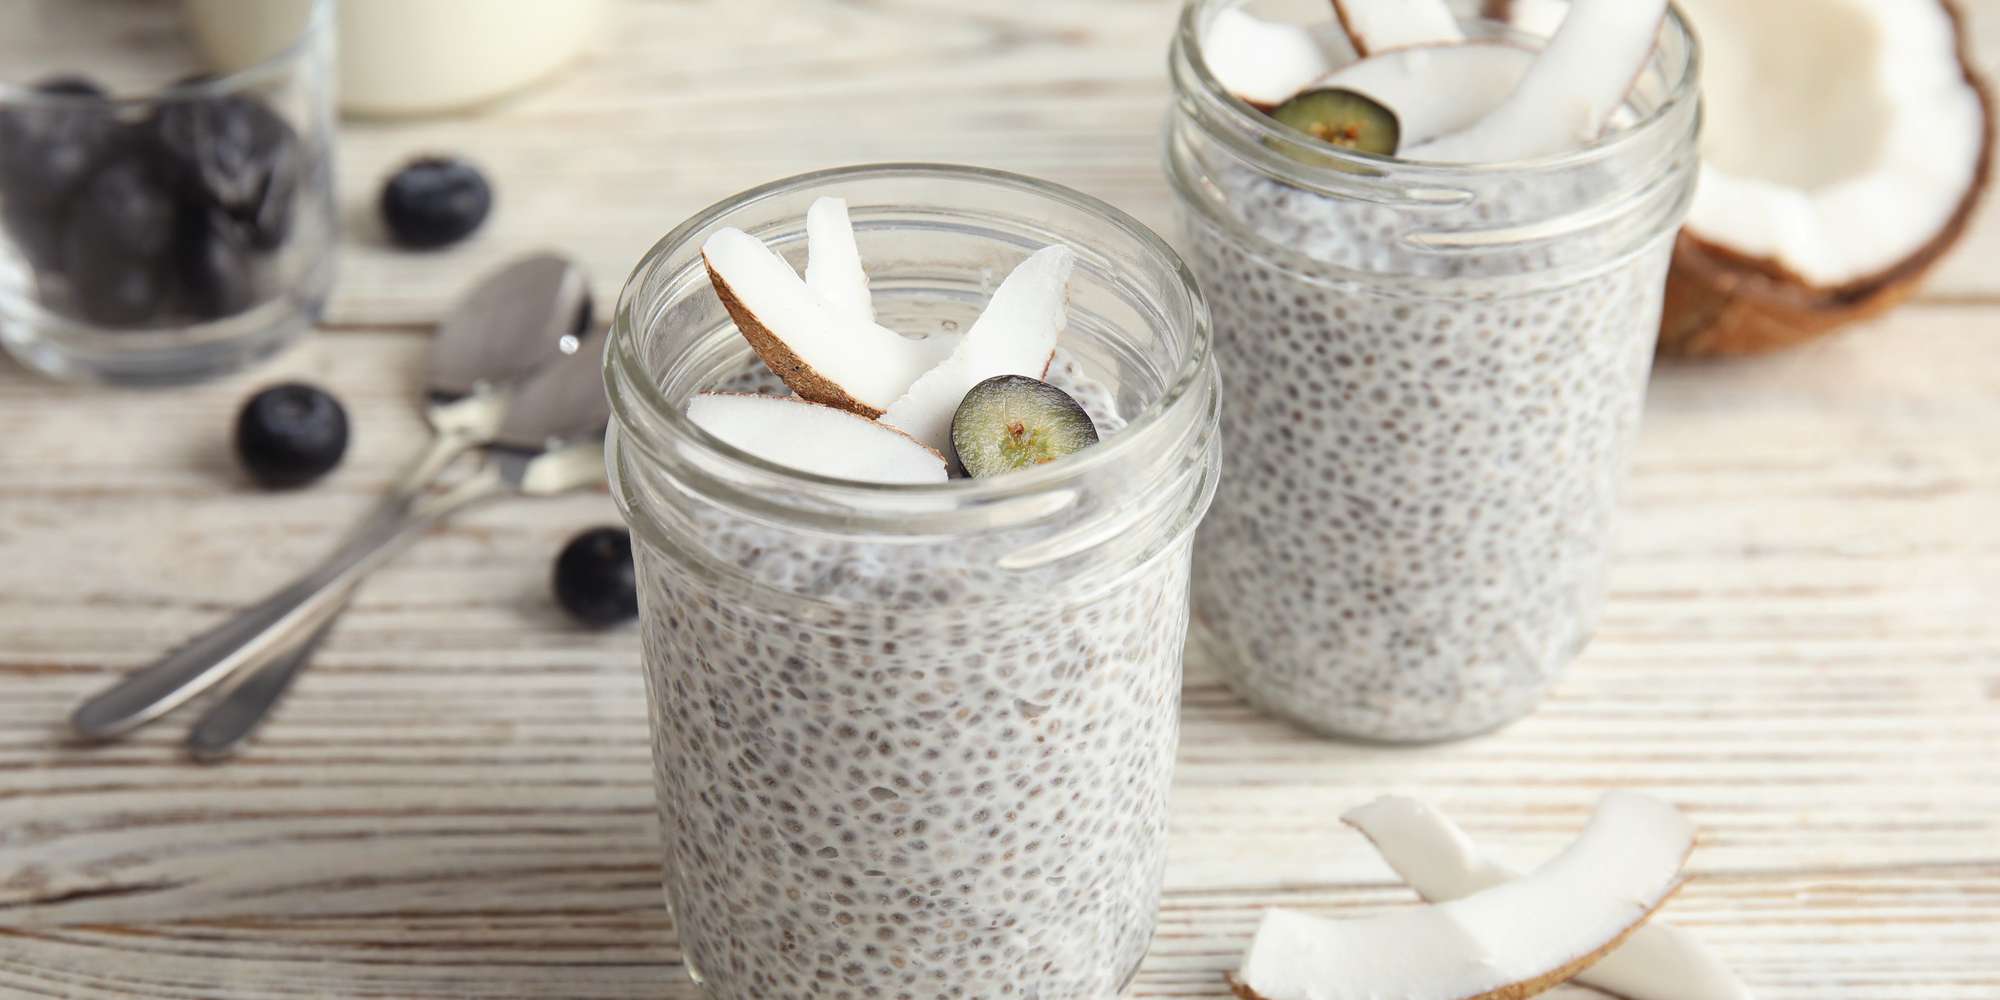 Low-carb chia pudding